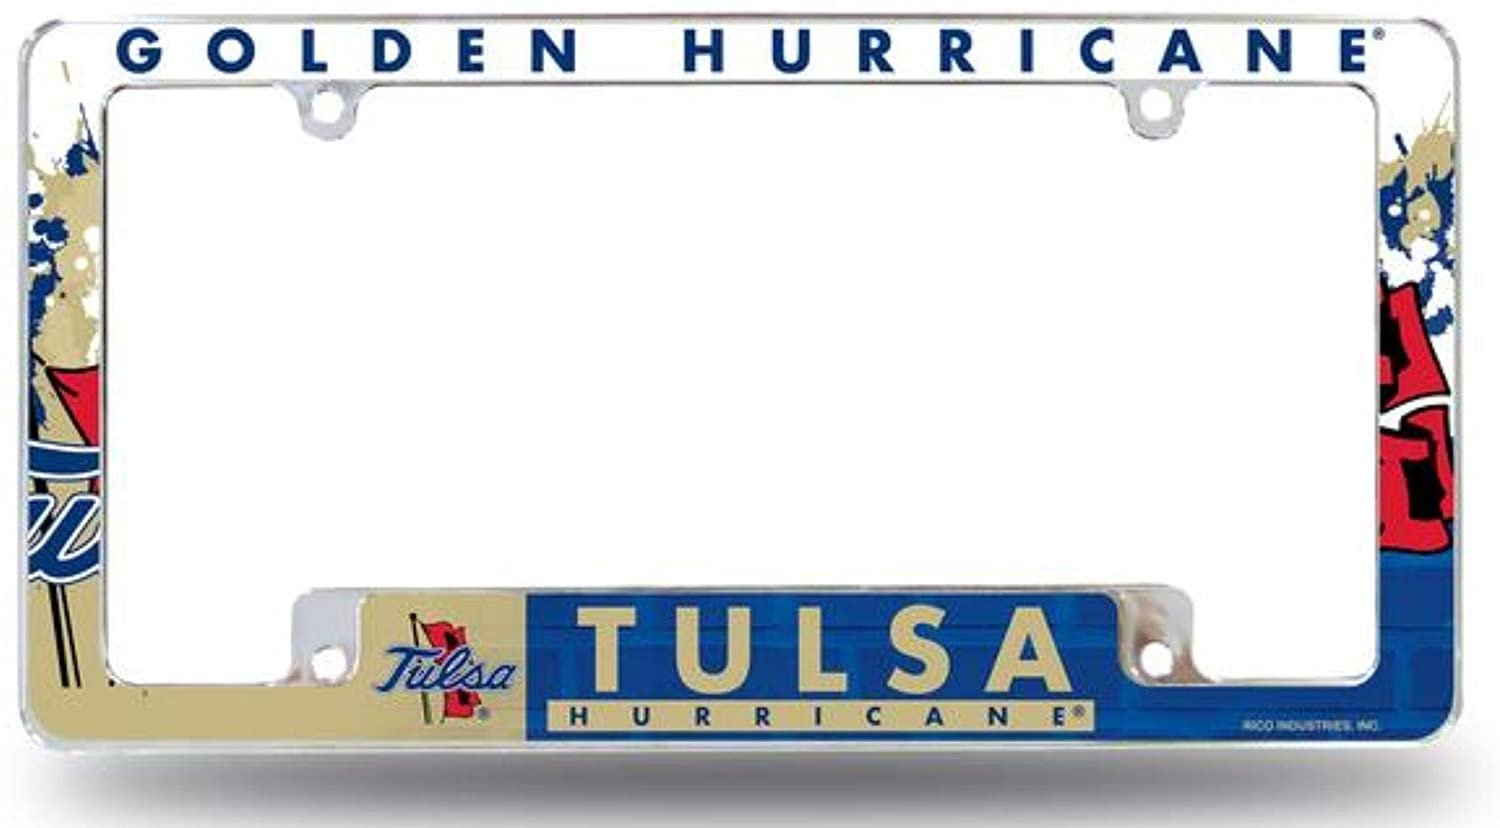 Tulsa University Golden Hurricanes Metal License Plate Frame Tag Cover, All Over Design, 12x6 Inch